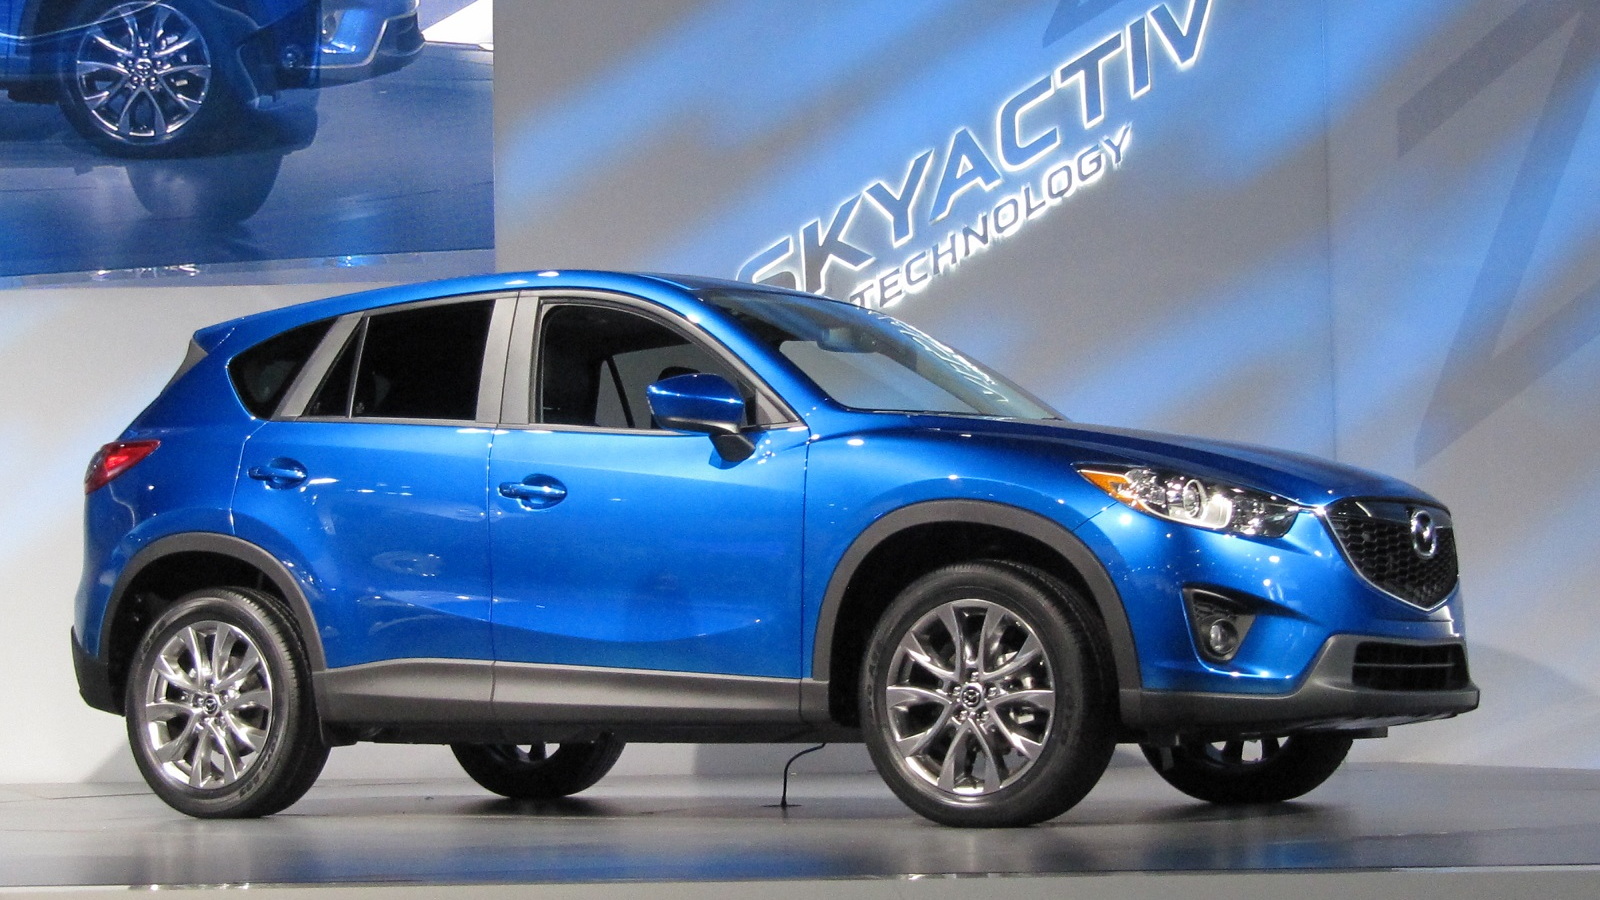 2013 Mazda CX-5 compact crossover revealed at Los Angeles Auto Show, Nov 2011